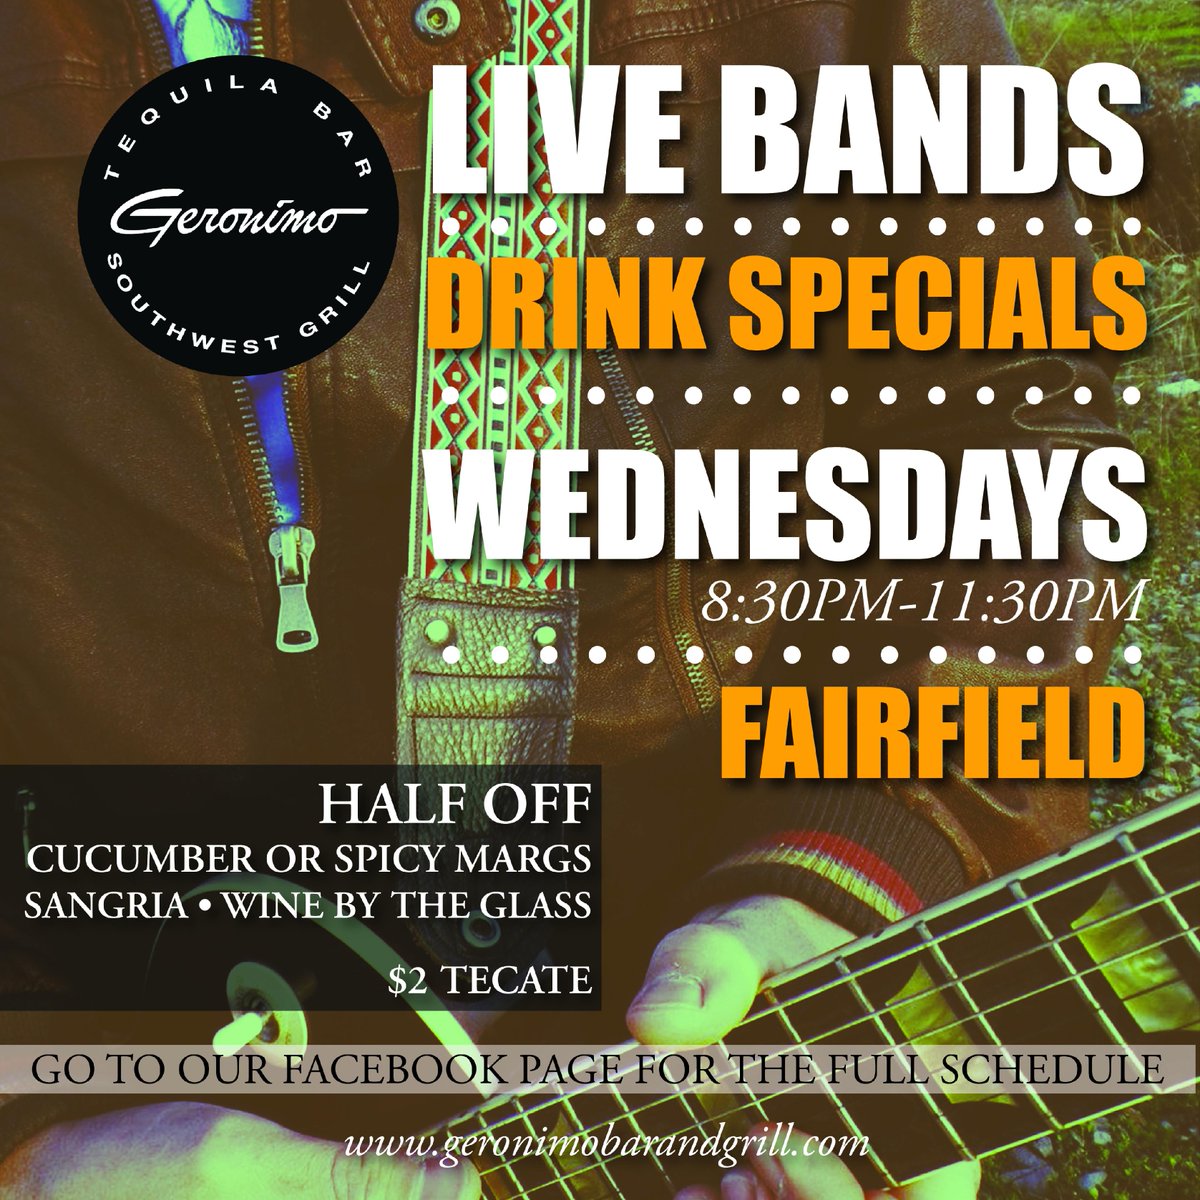 Happy Hump Day! LIVE BAND Wednesday in Fairfield tonight is Ryan Sage! Come enjoy 8:30-11:30pm 🎸

#geronimobarandgrill #tacolover #ctfoodie #tacomeme #ctfoodlovers #tacoaficionado #fairfieldct #buymetacos #betacos #ctfoodie #fairfieldcountyct #themoreyougeronimo